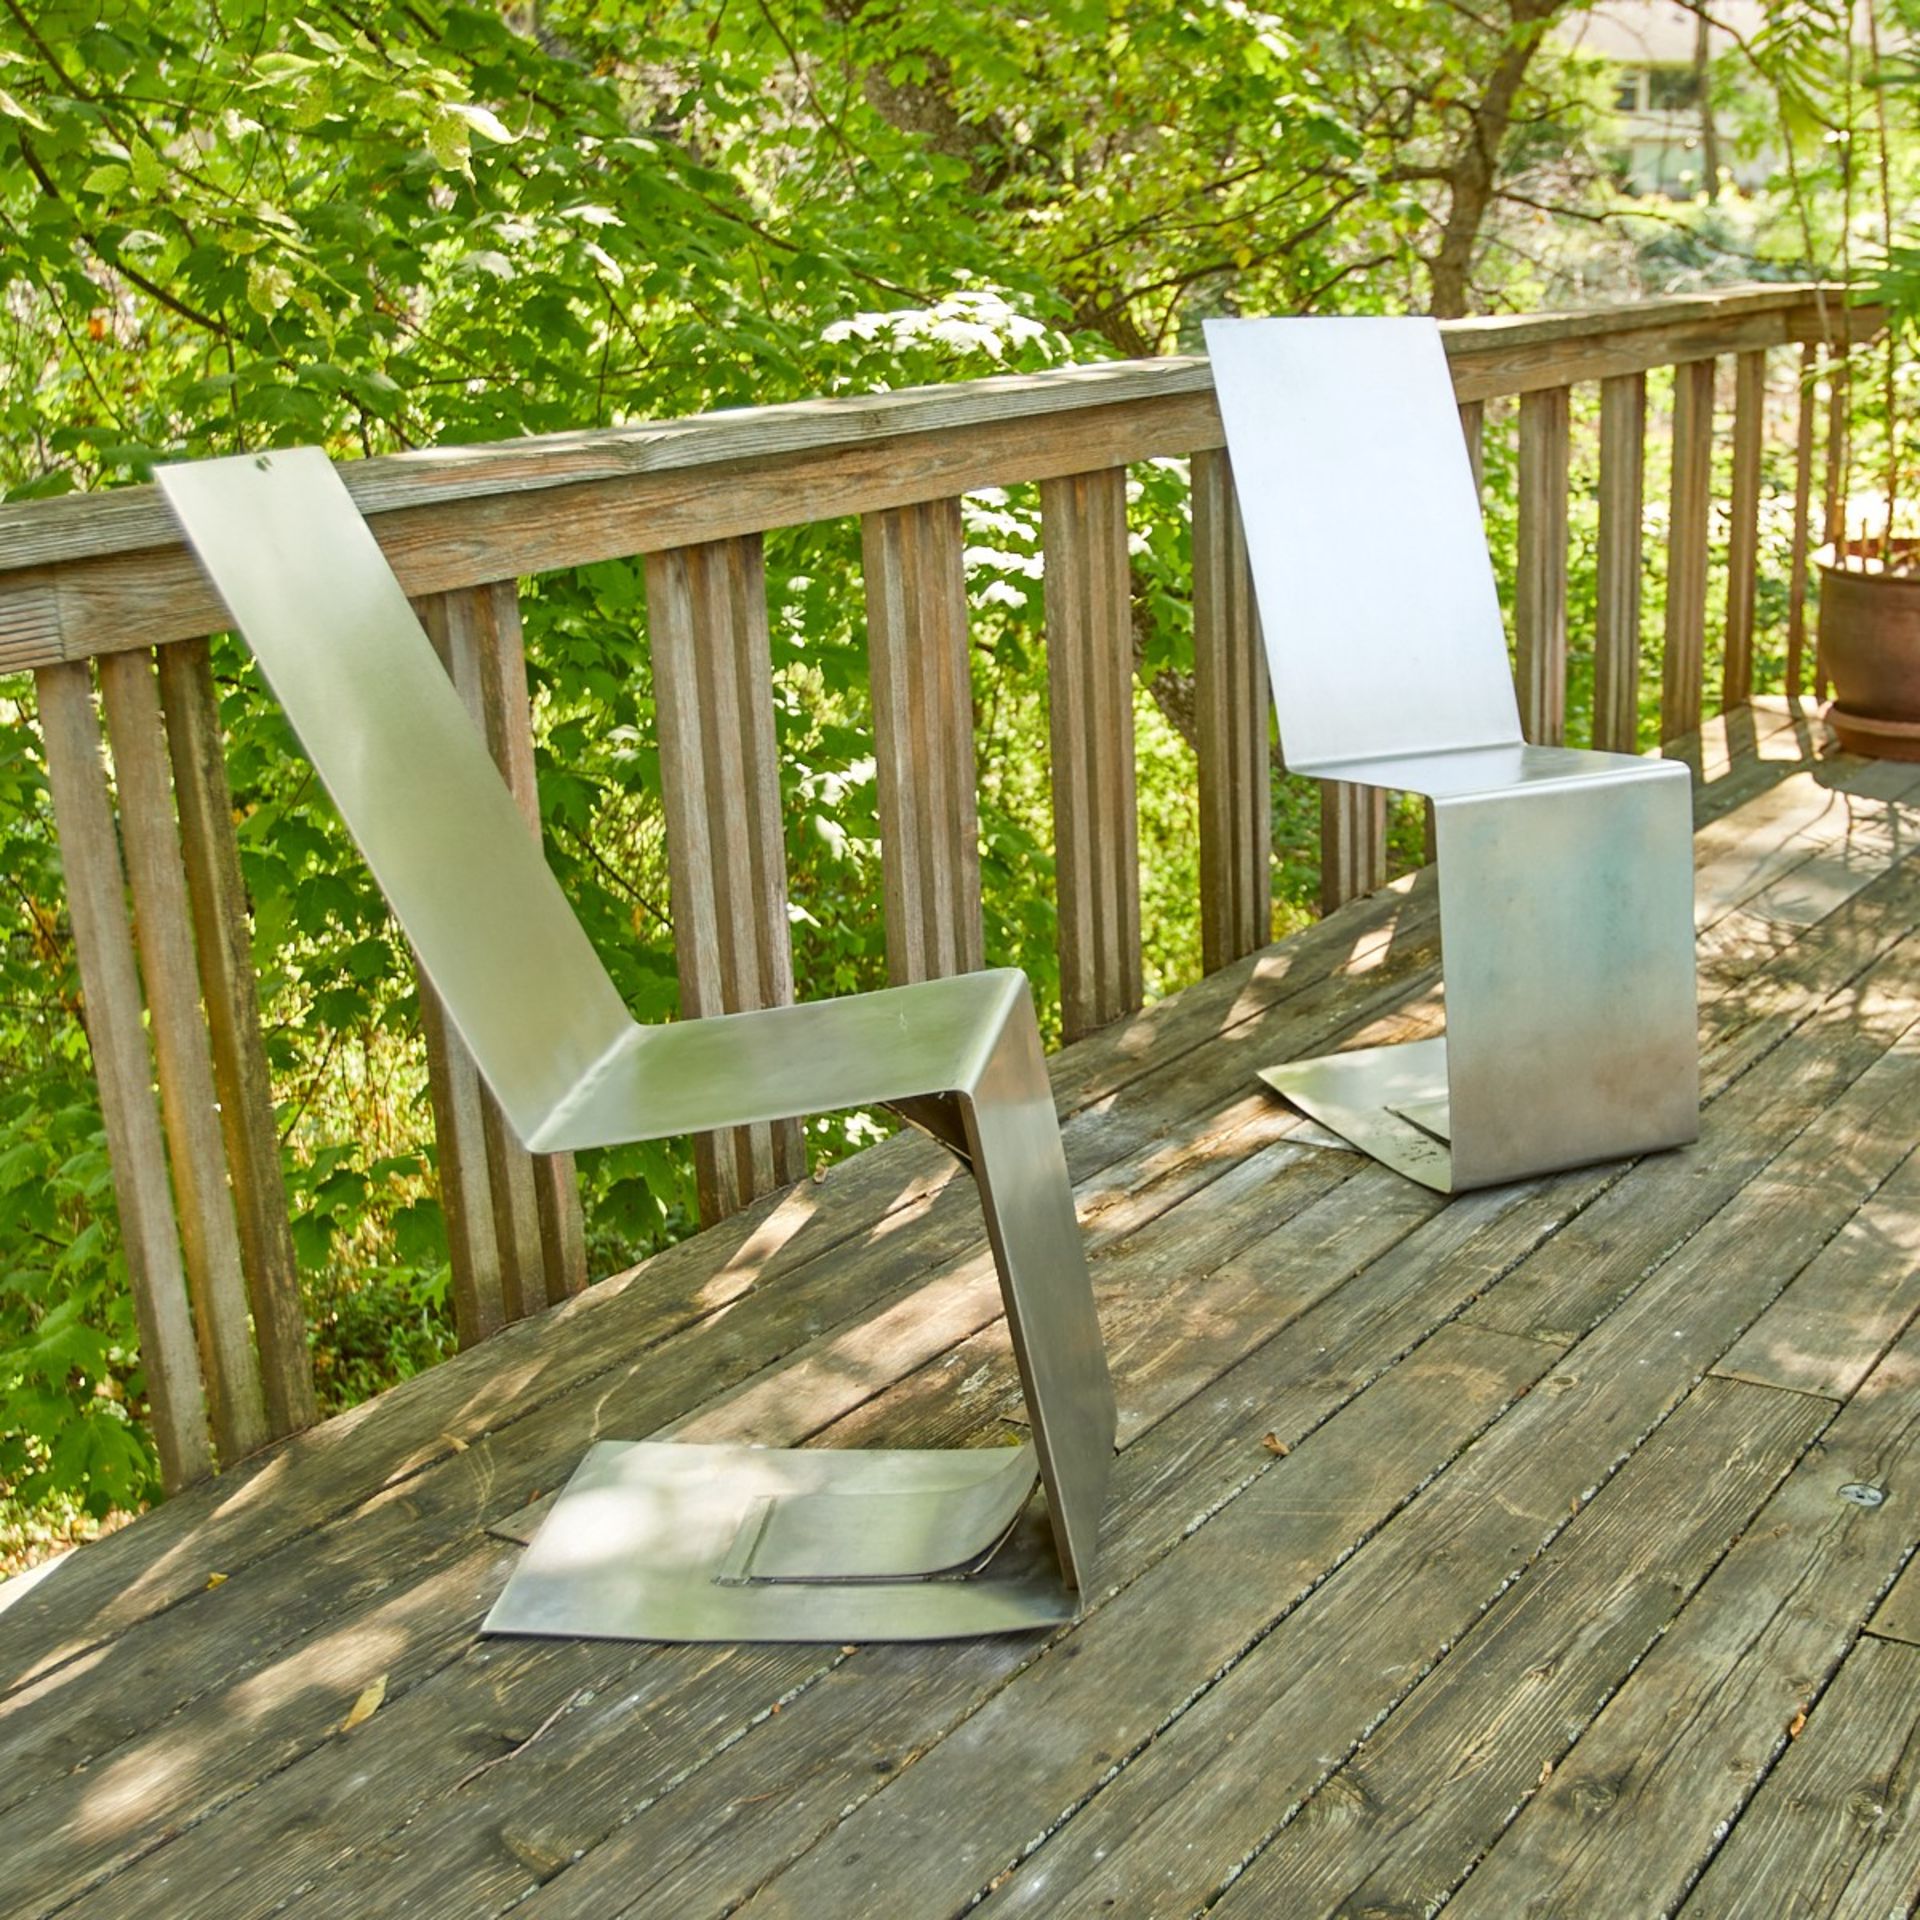 Pair of Modernist Stainless Steel Seats - Image 3 of 3